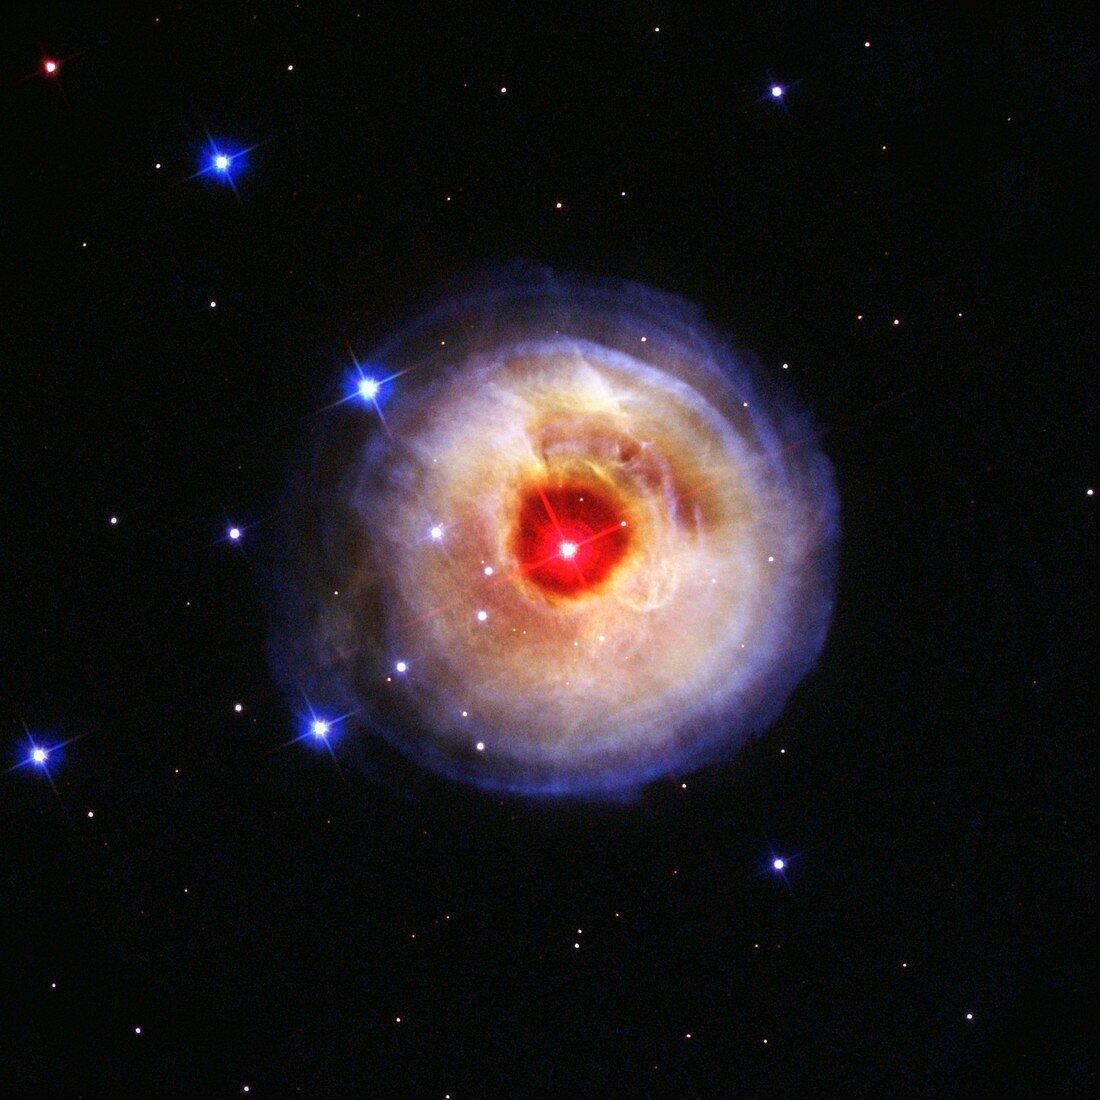 Light echoes from exploding star